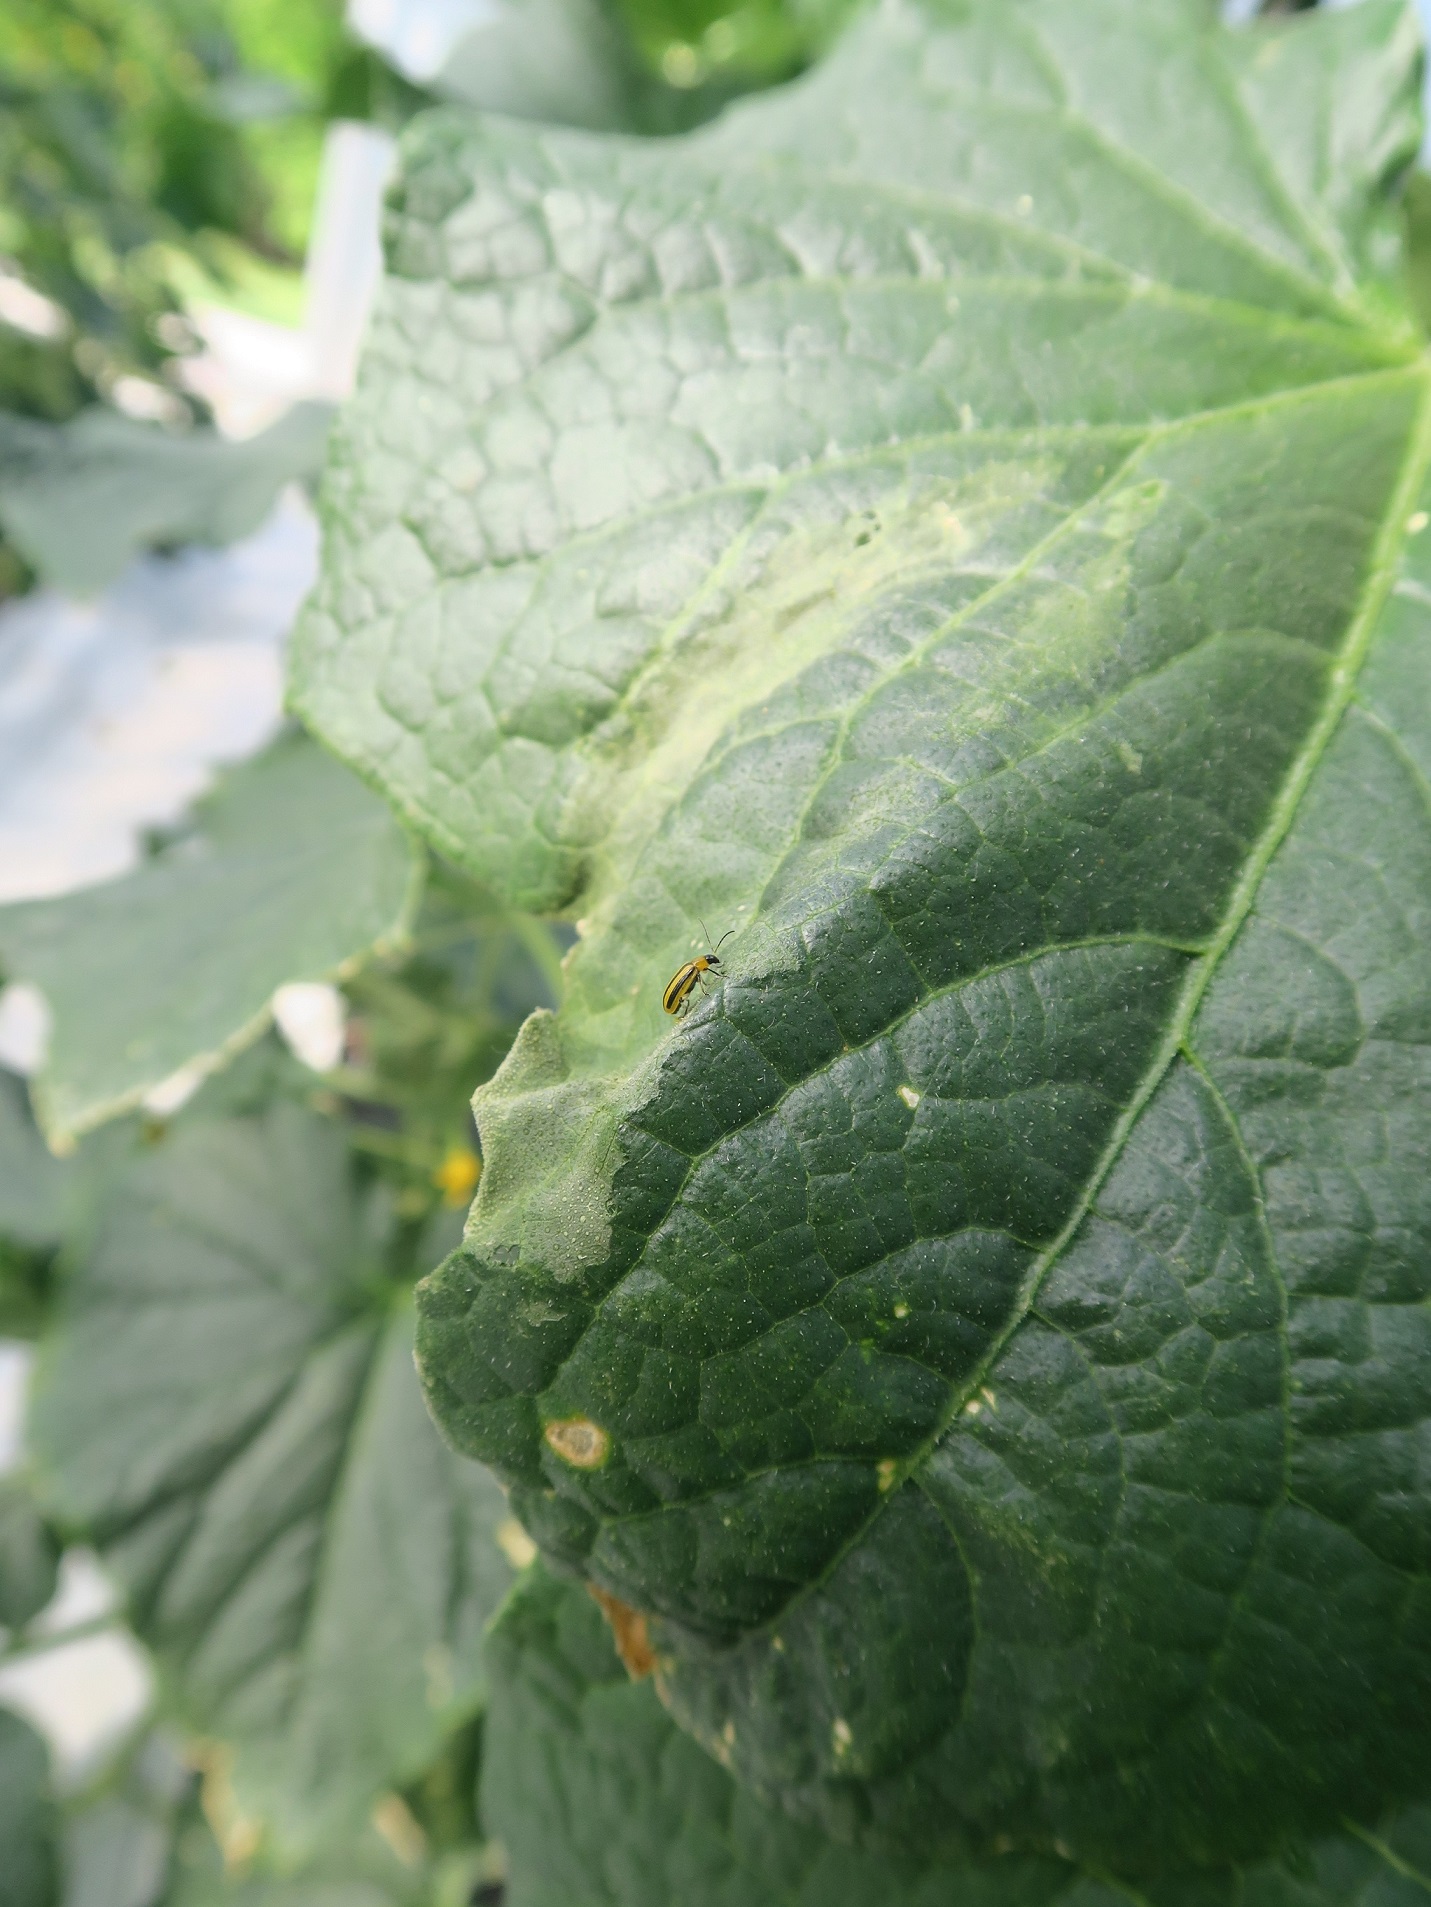  Striped cucumber beetle on cucumber leaf with bacterial wilt.